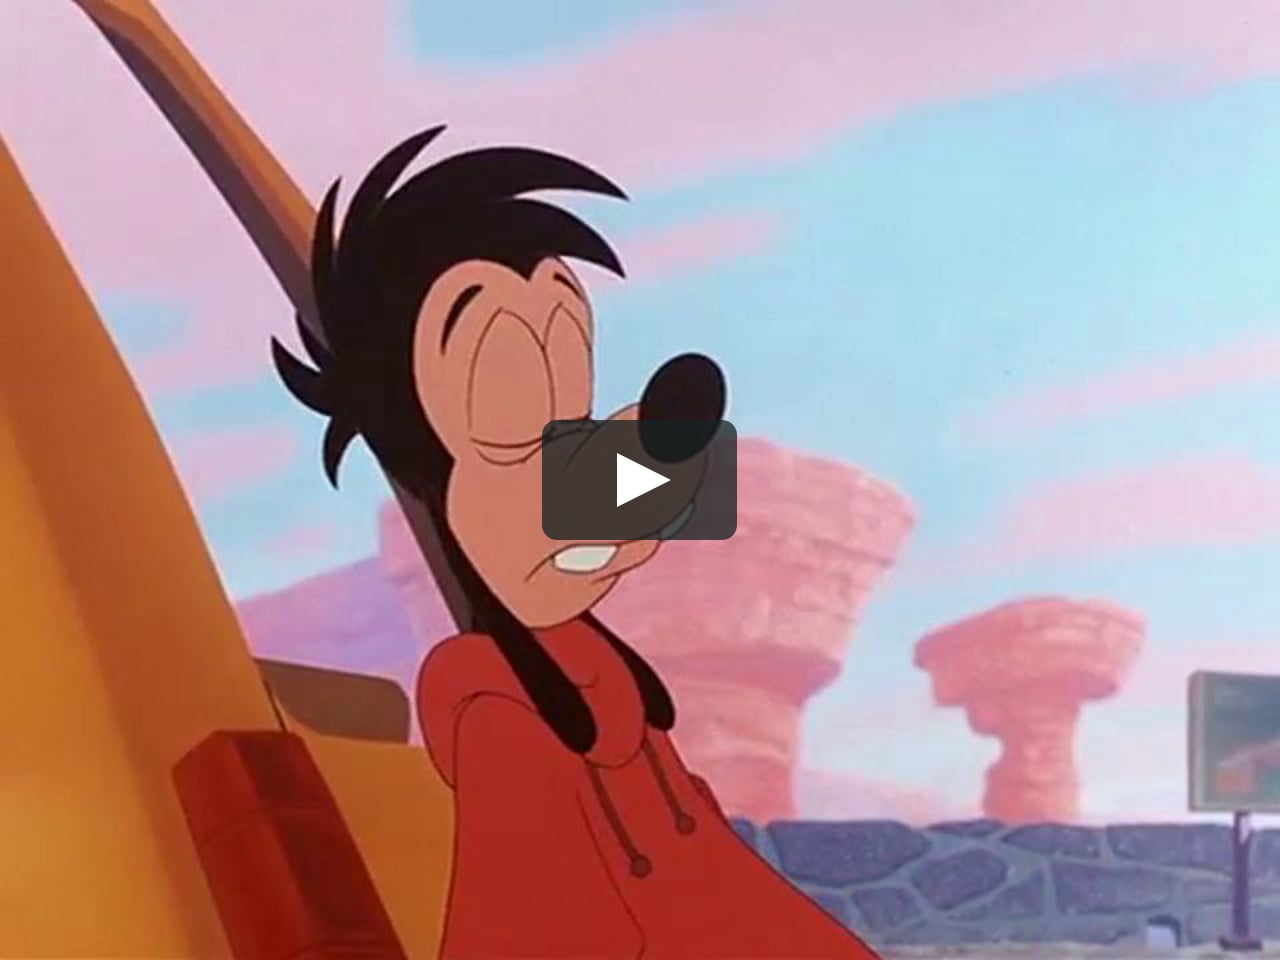 A Goofy Movie - Car out of control.